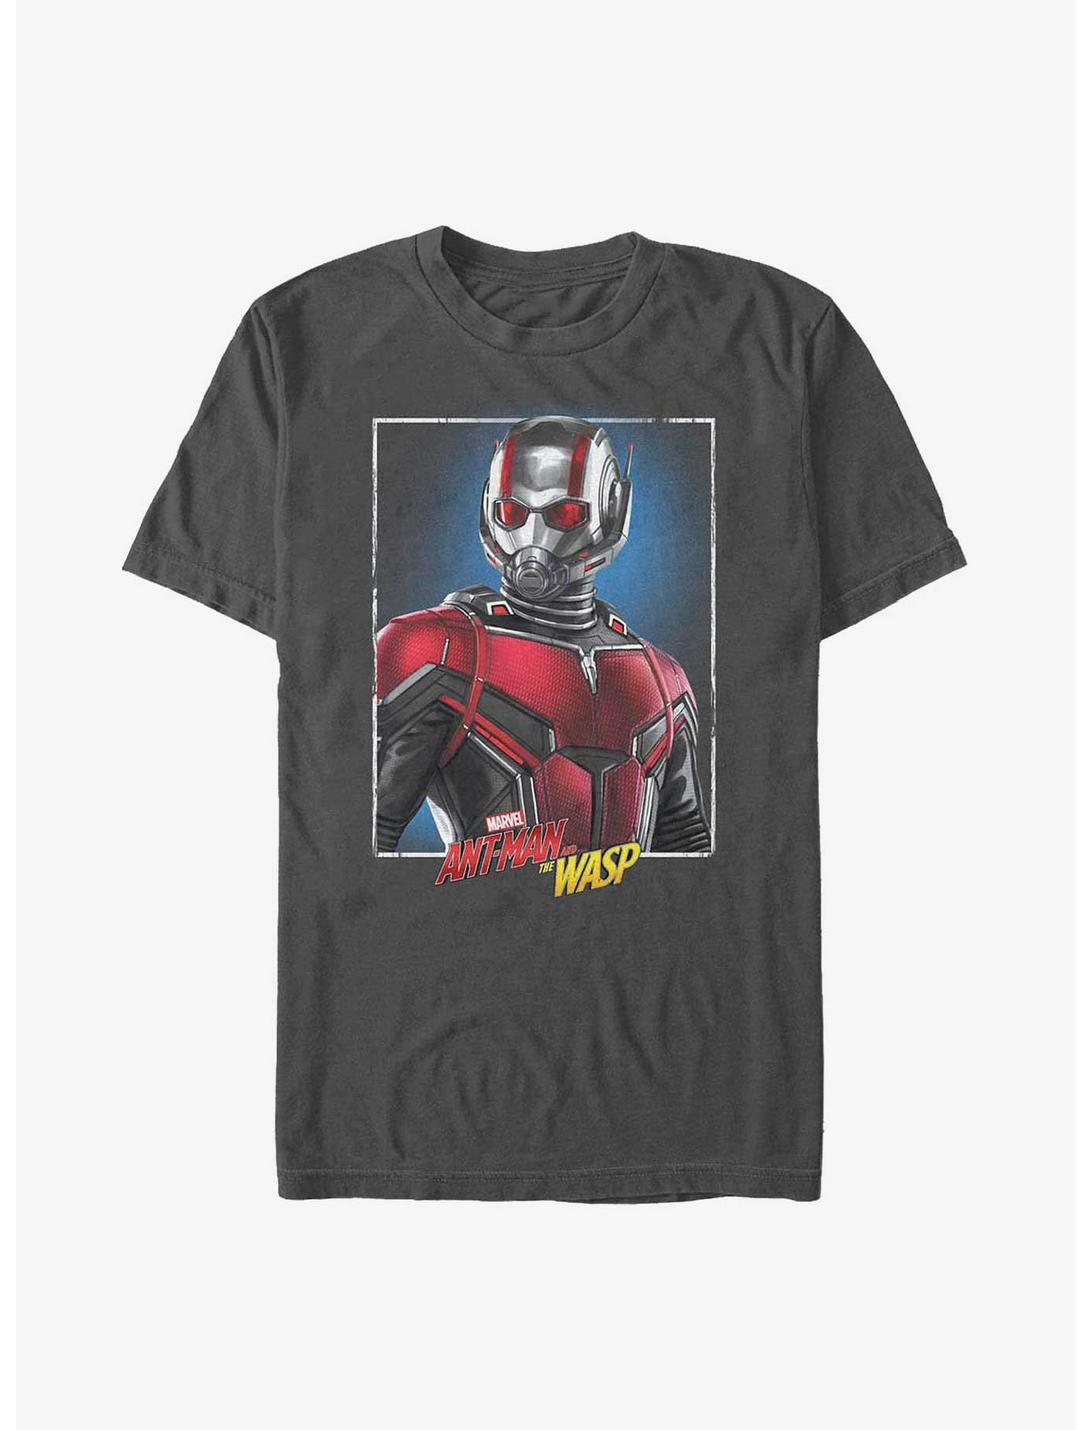 Marvel Ant-Man and the Wasp Ant-Man Poster T-Shirt, CHARCOAL, hi-res